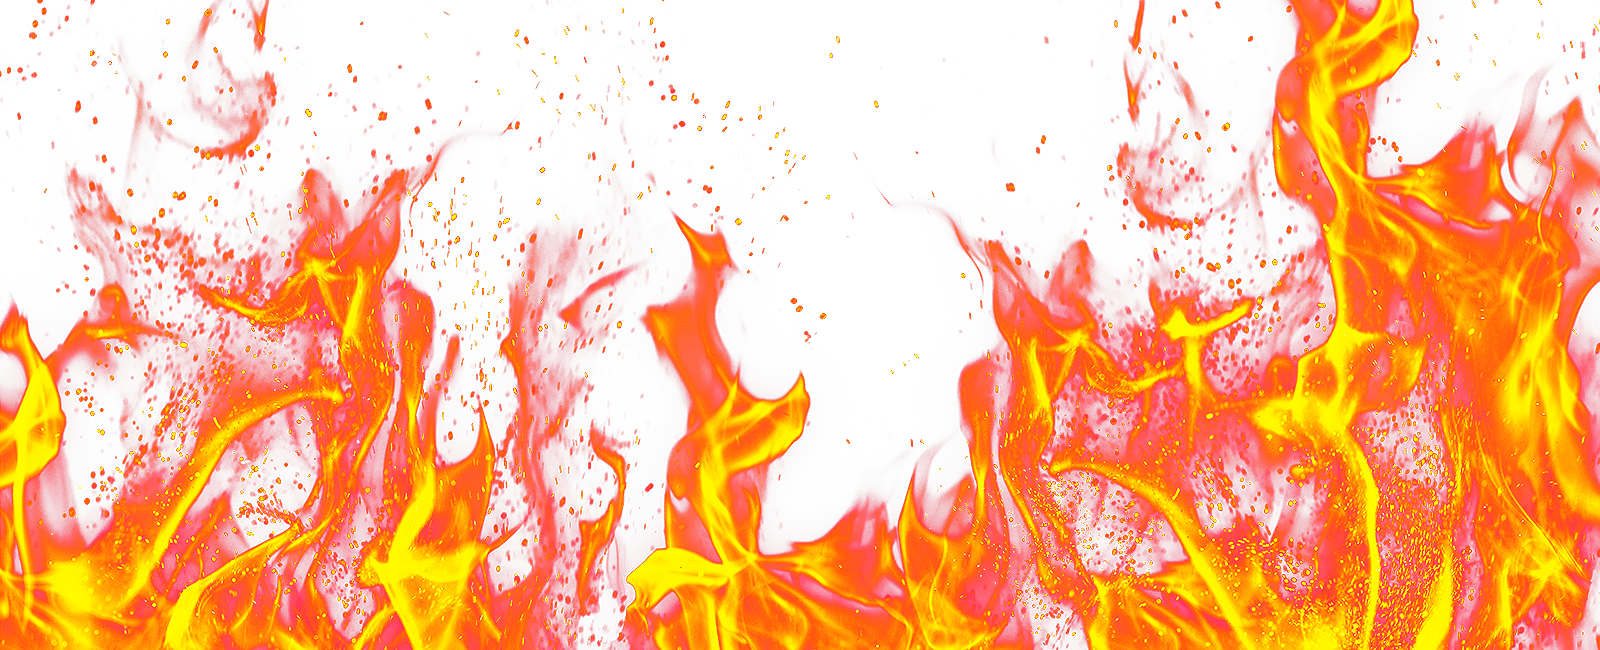 Fire png image purepng. Flames clipart motorcycle